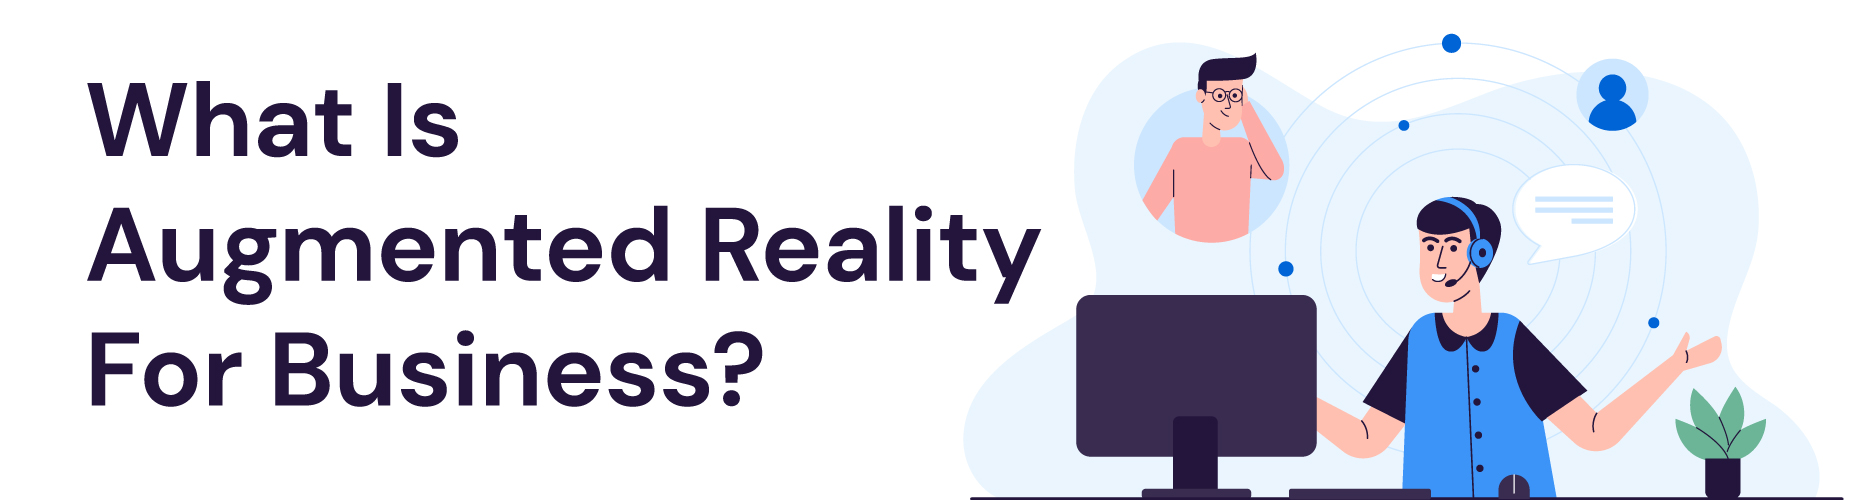 what is Augmented Reality In Customer Service 